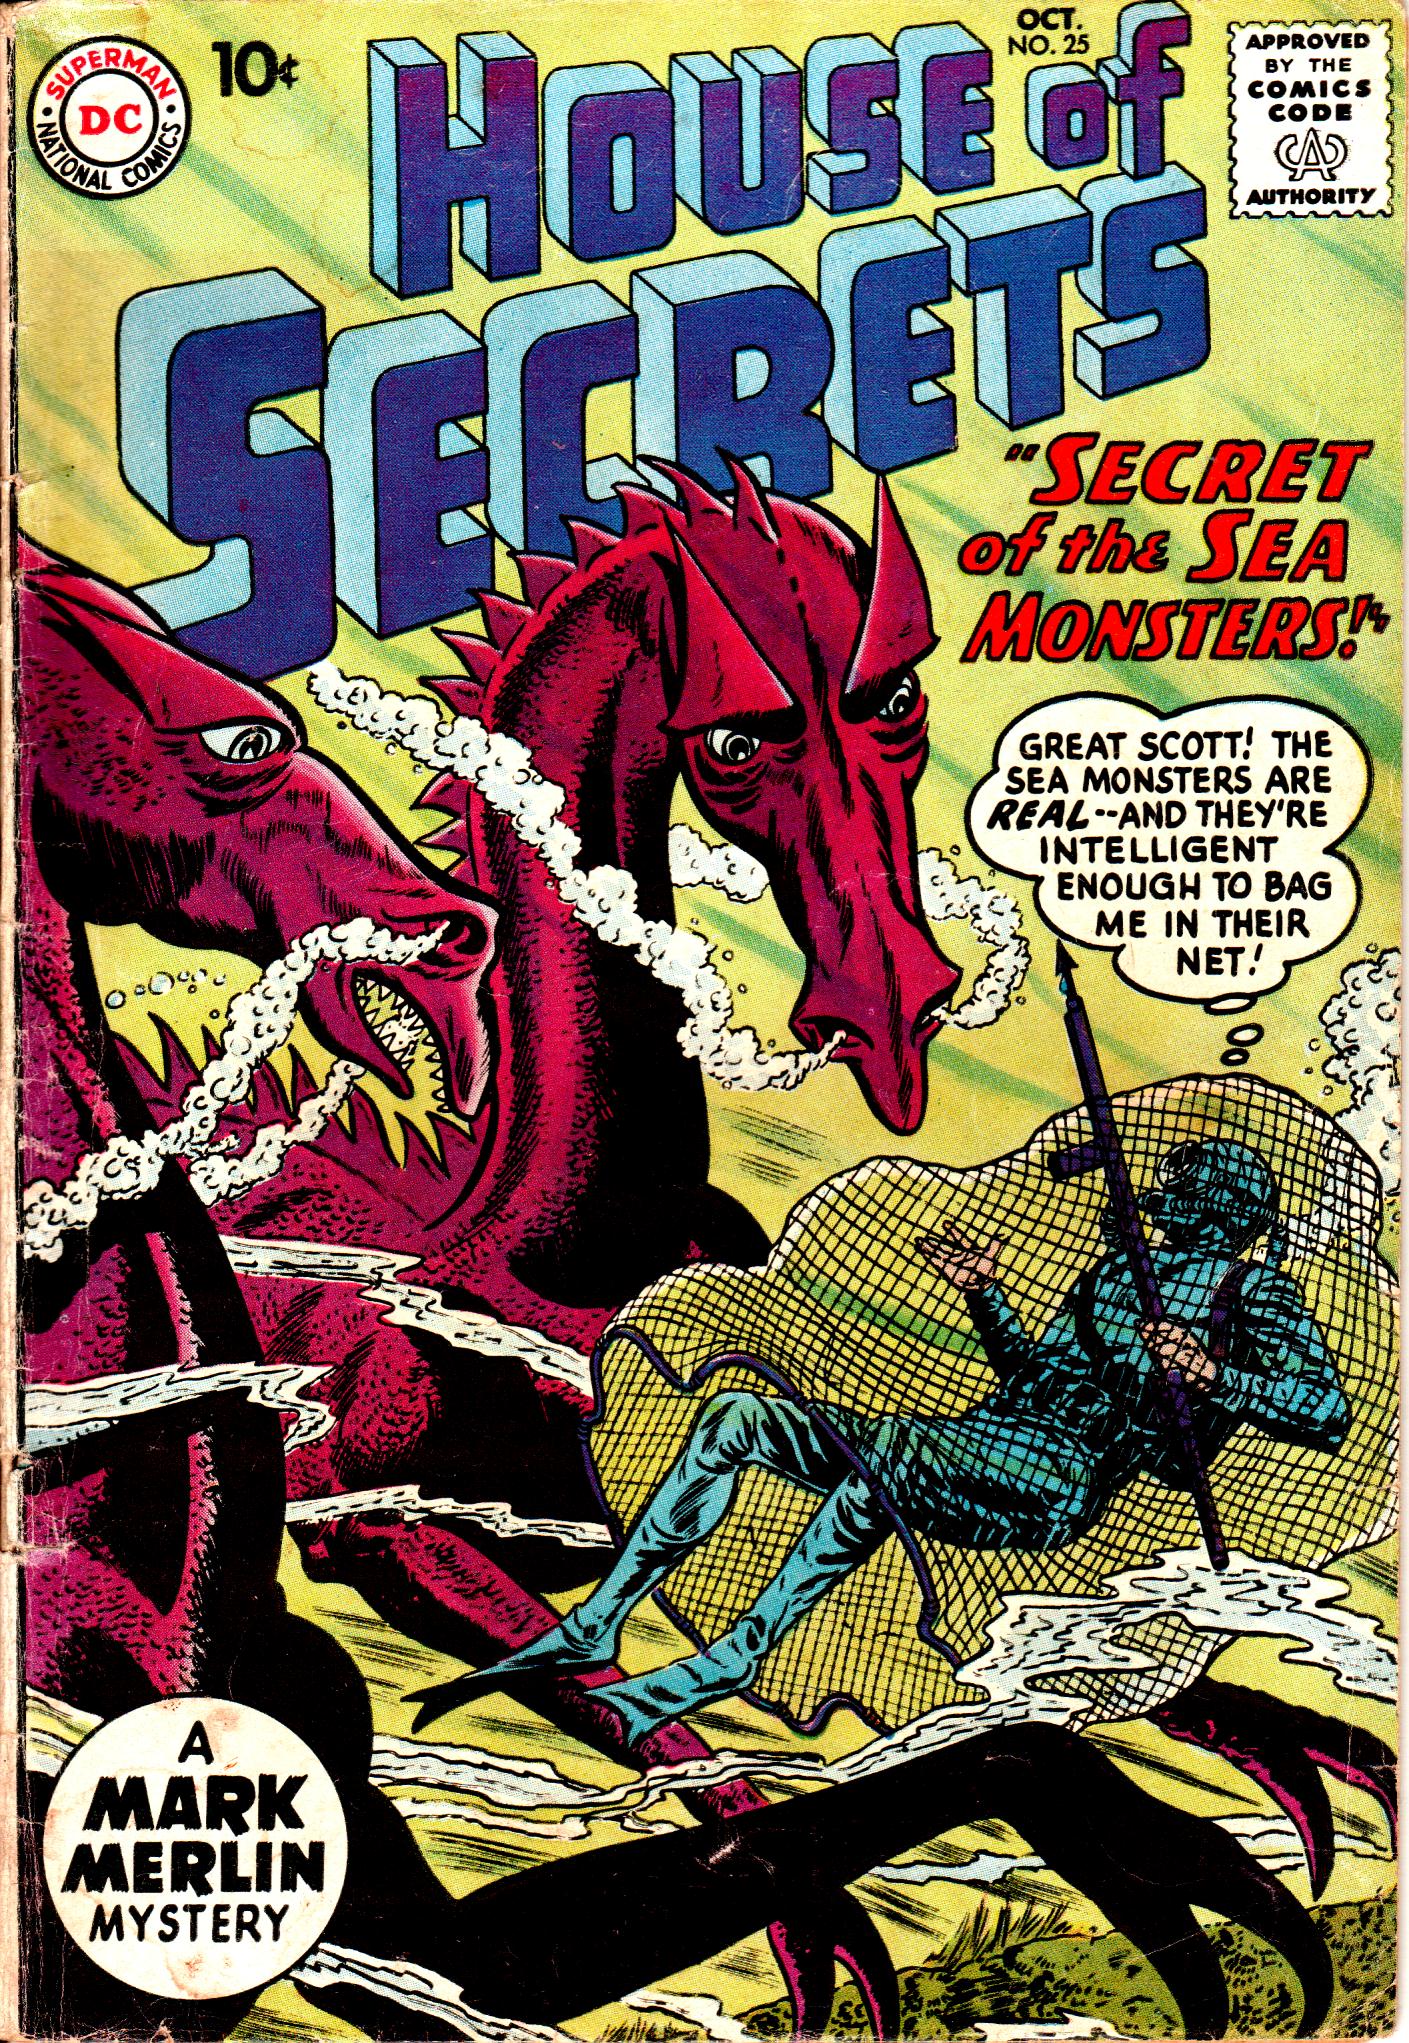 Read online House of Secrets (1956) comic -  Issue #25 - 1